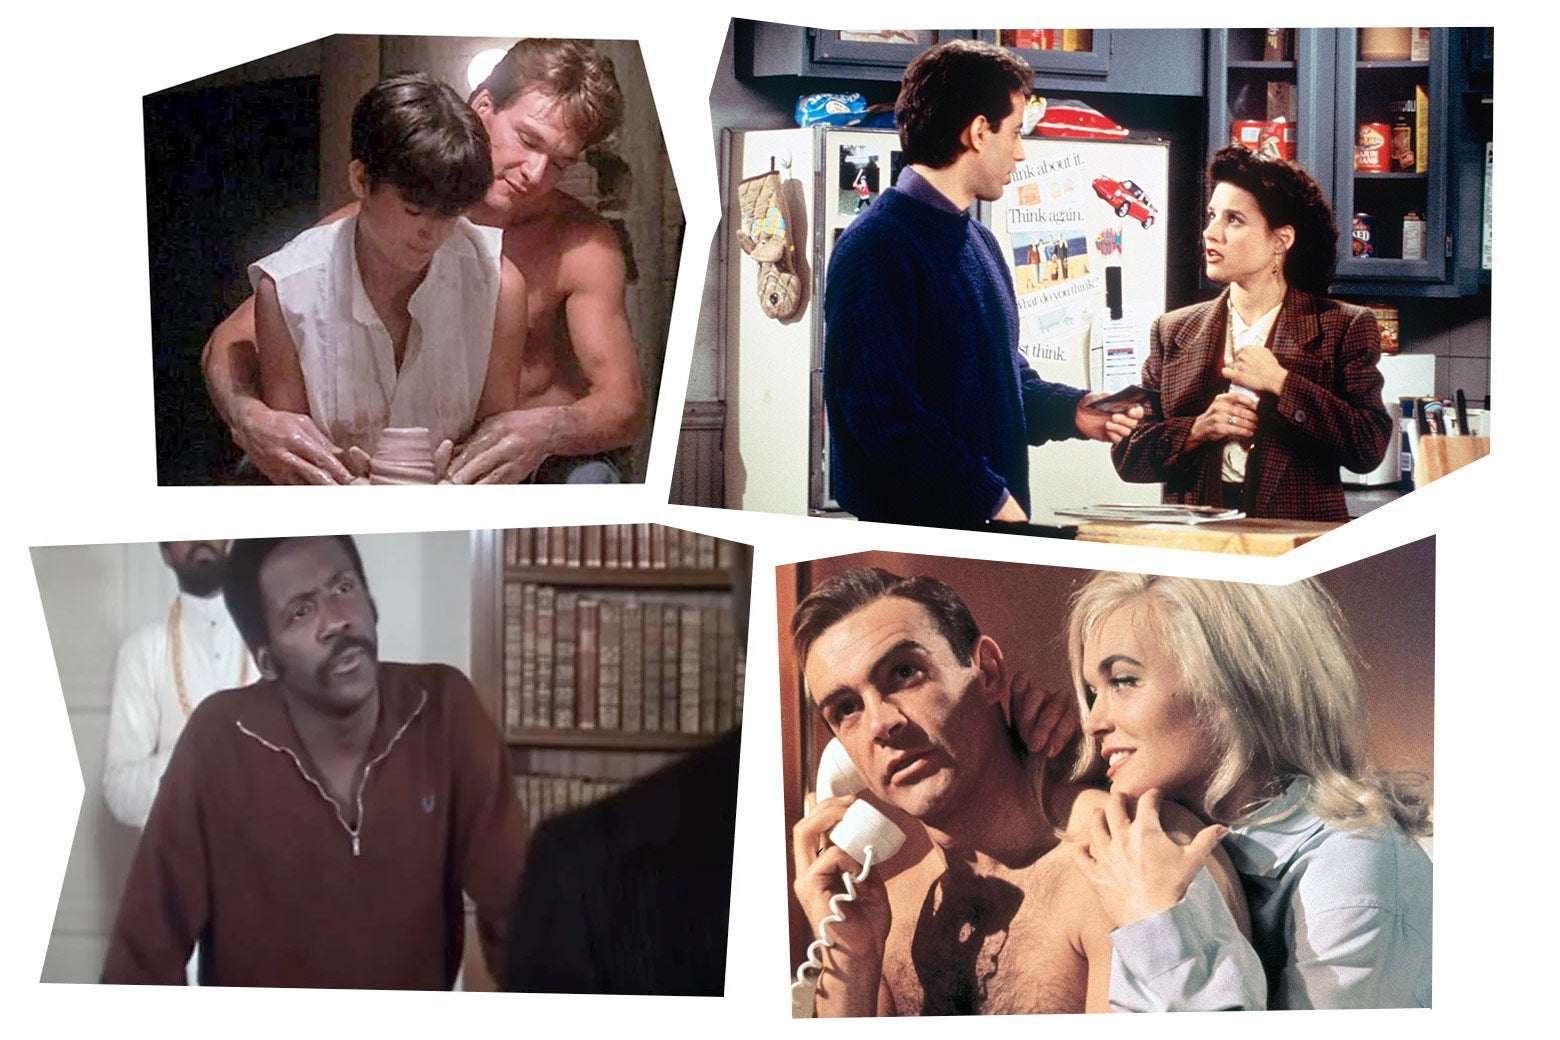 Top left: A shirtless Patrick Swayze sits behind Demi Moore before a pottery wheel. Top right: Julia Louis-Dreyfus and Jerry Seinfeld in a kitchen. Bottom left: Richard Roundtree stands in front of a bookshelf. Bottom right: A shirtless Sean Connery holds a phone to his ear while smiling Shirley Eaton leans on his shoulder.